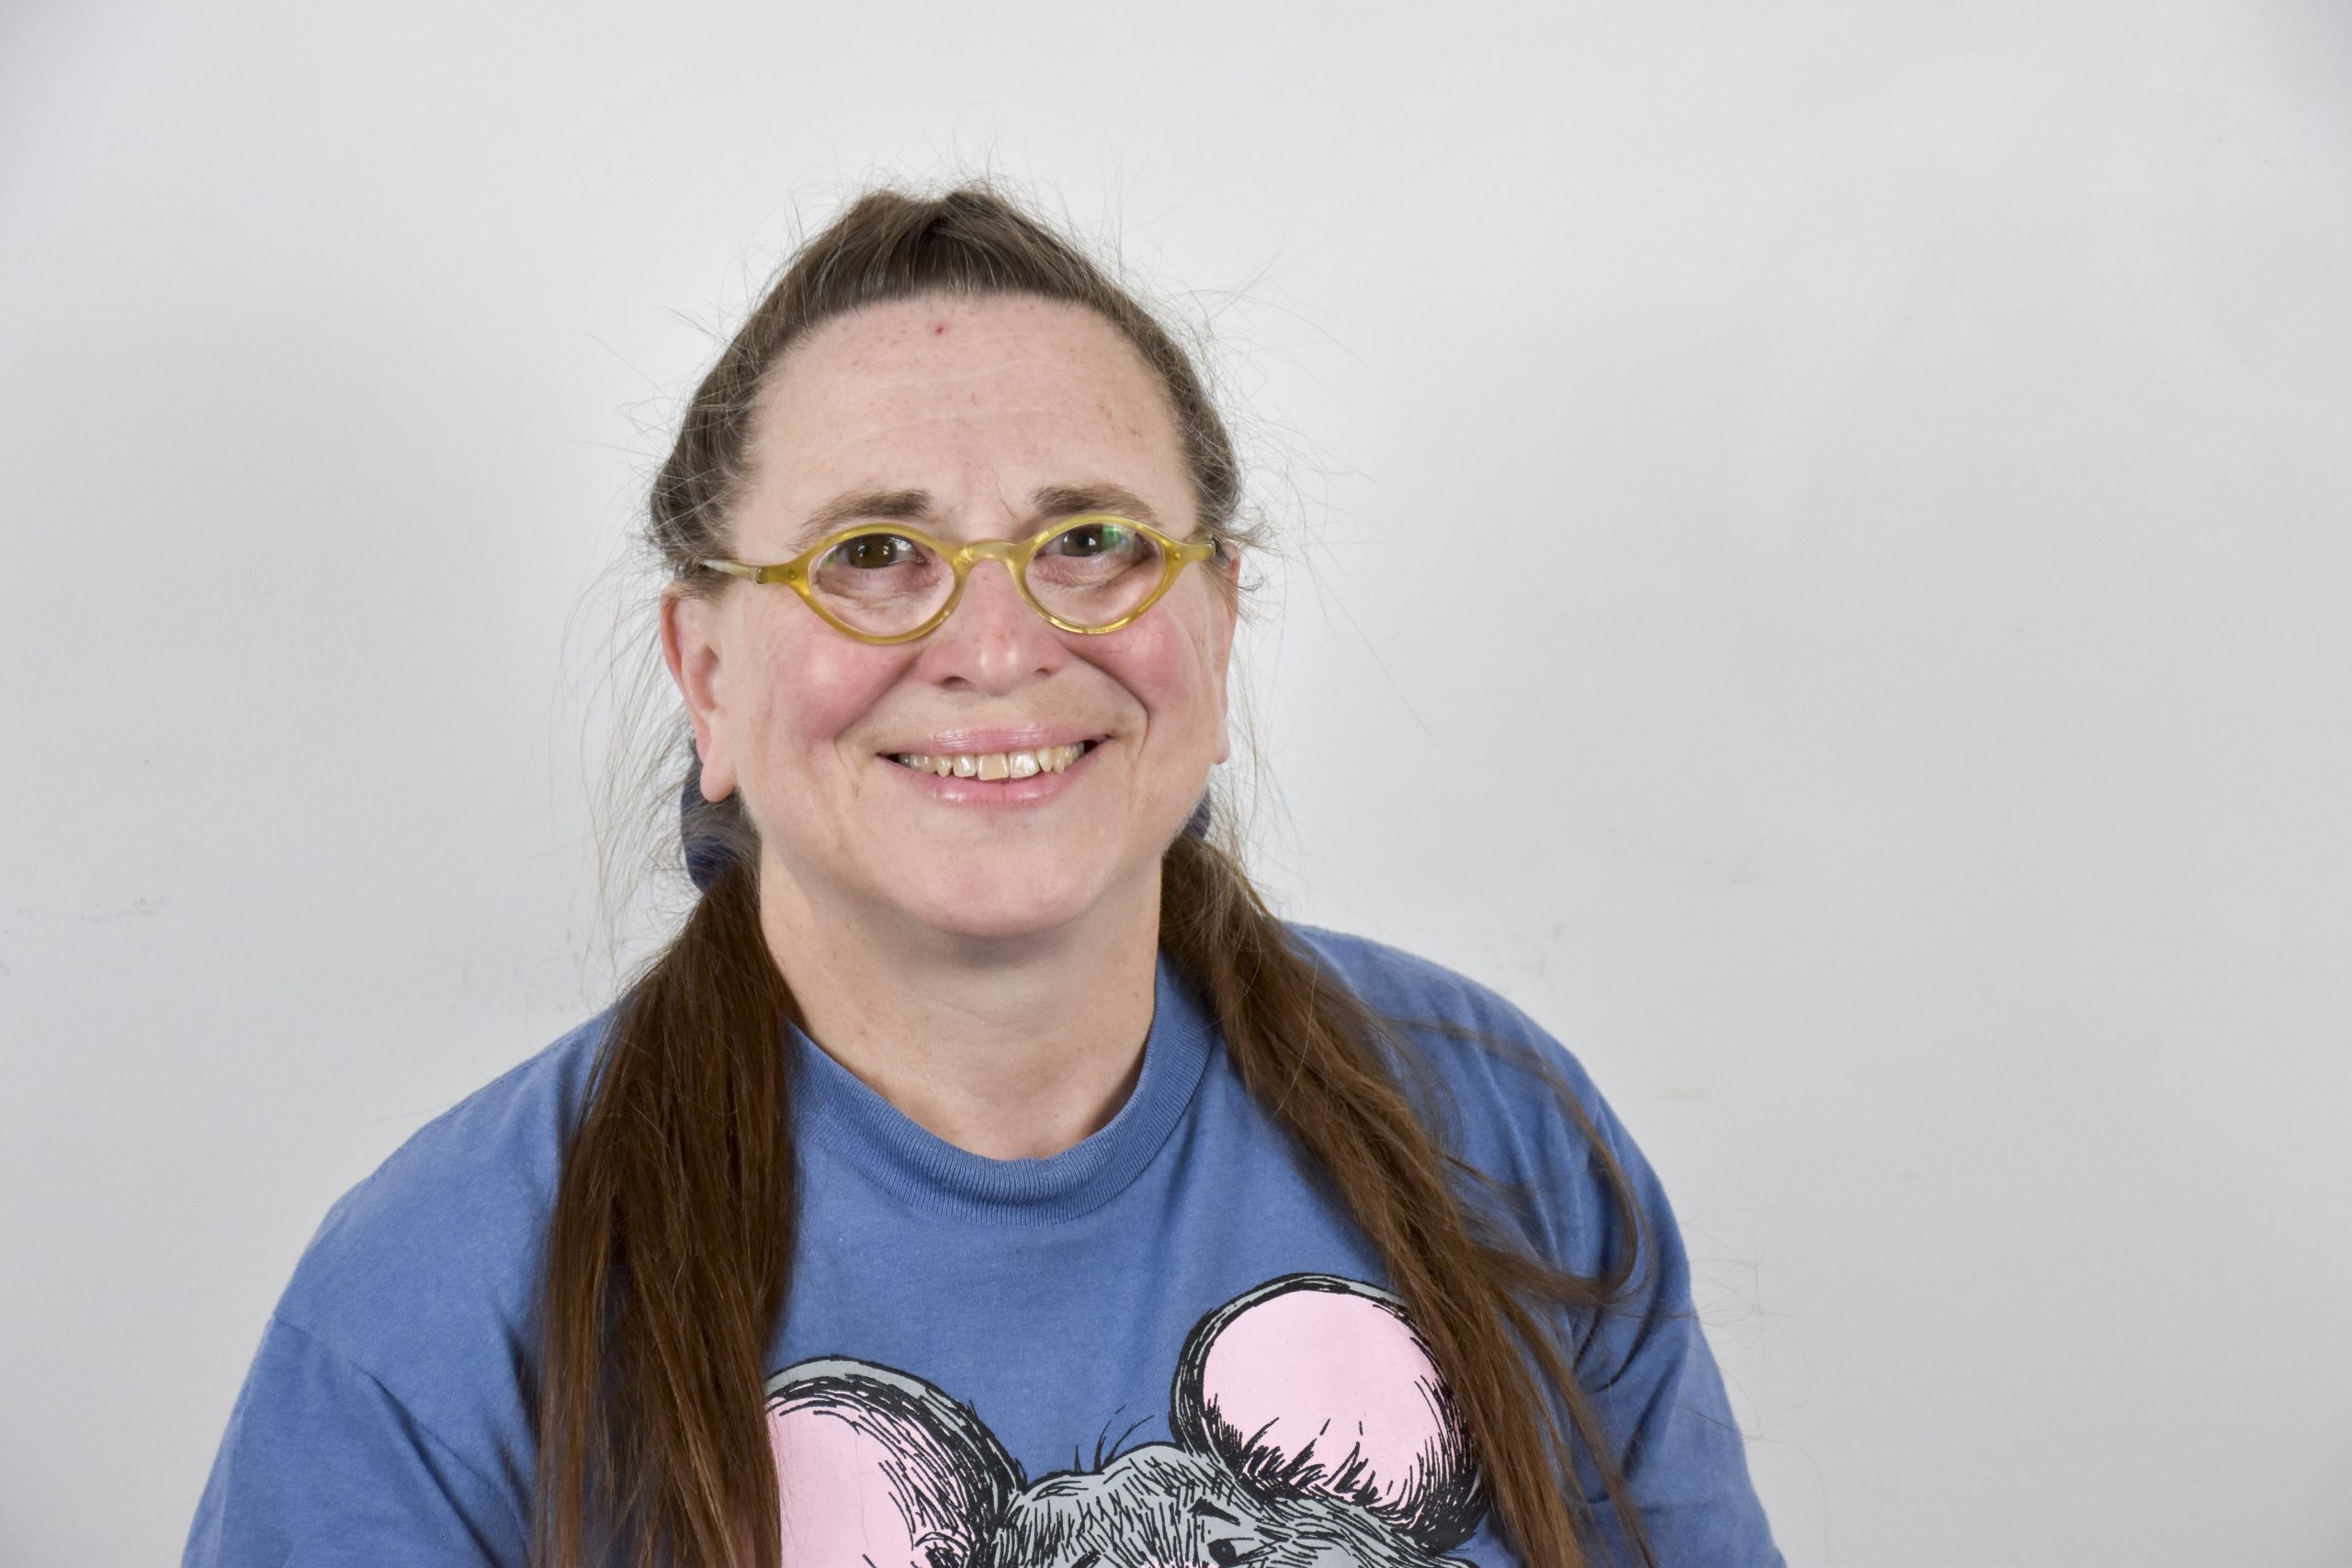 Photo of Kathy Austin. She is wearing a blue shirt, with her brown hair styled in a half up, half down hair style. She is wearing glasses and smiling at the gamer. The background is a light grey wall.